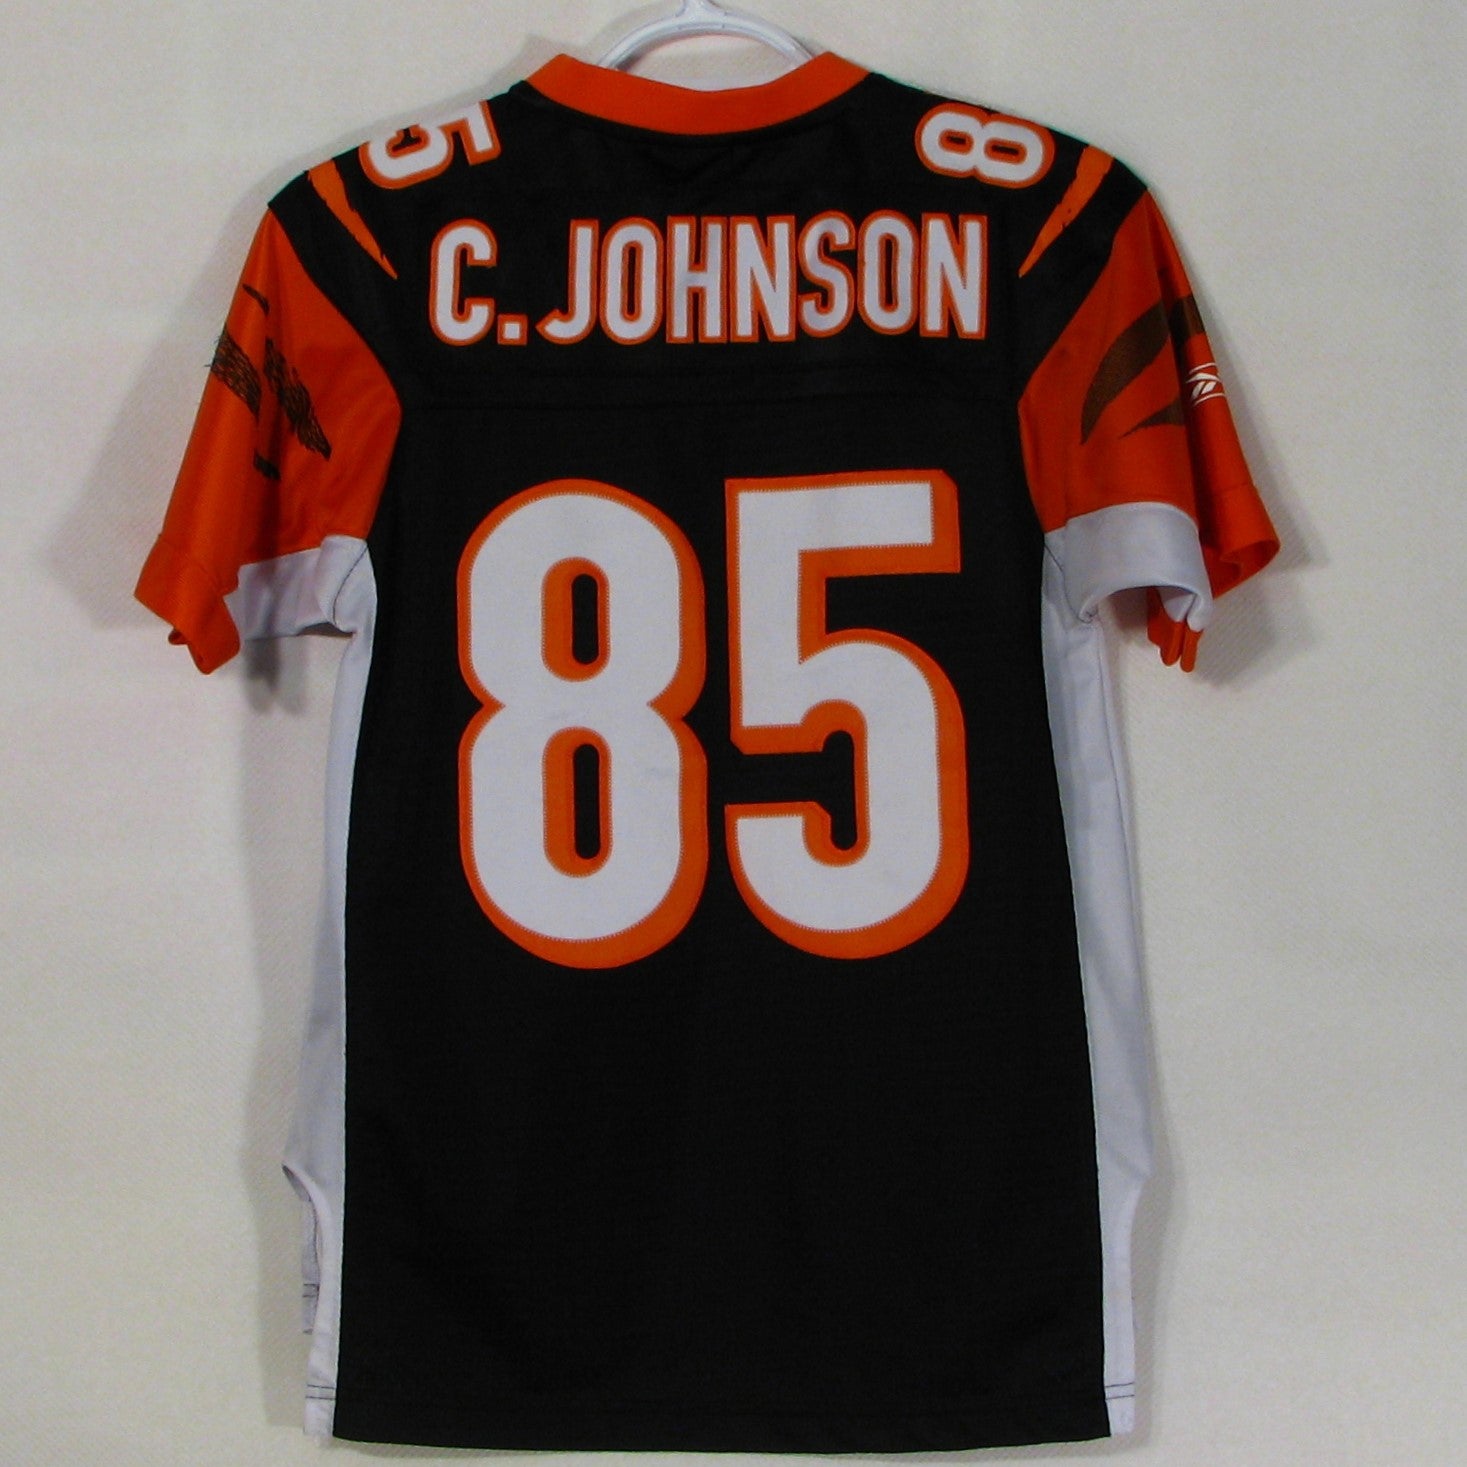 youth bengals jersey